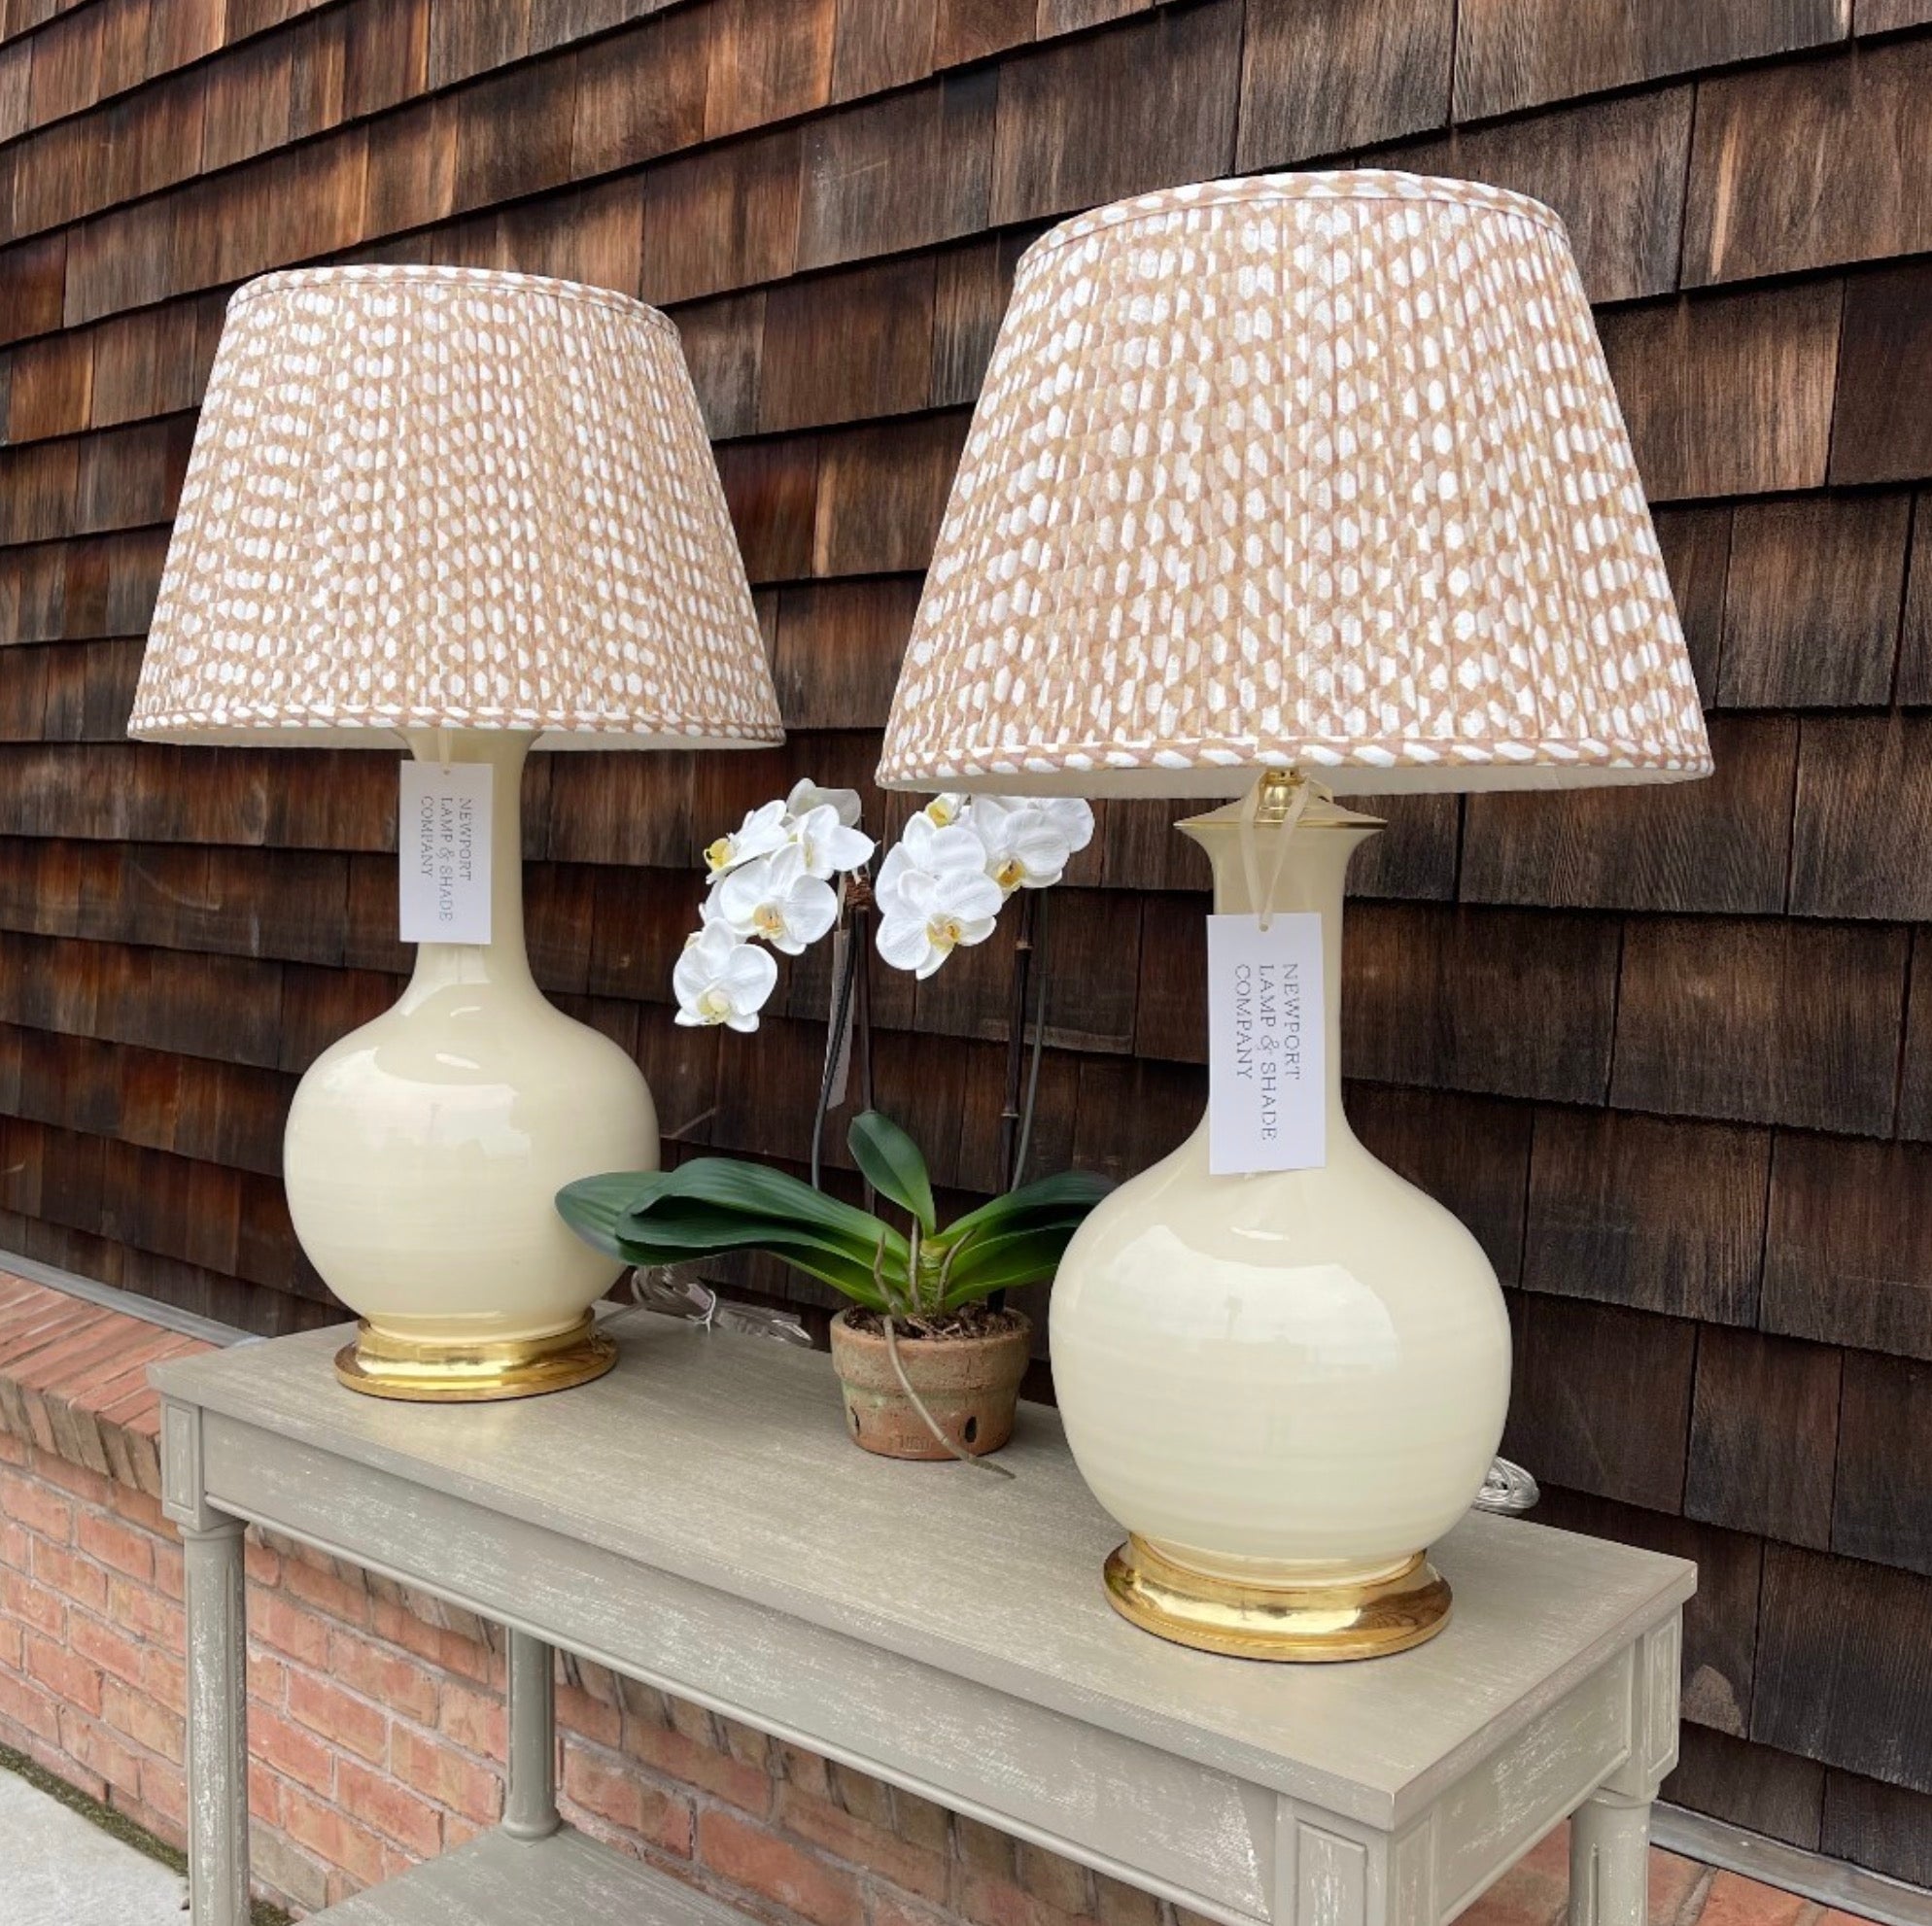 The Charm of Patterned Lamp Shades